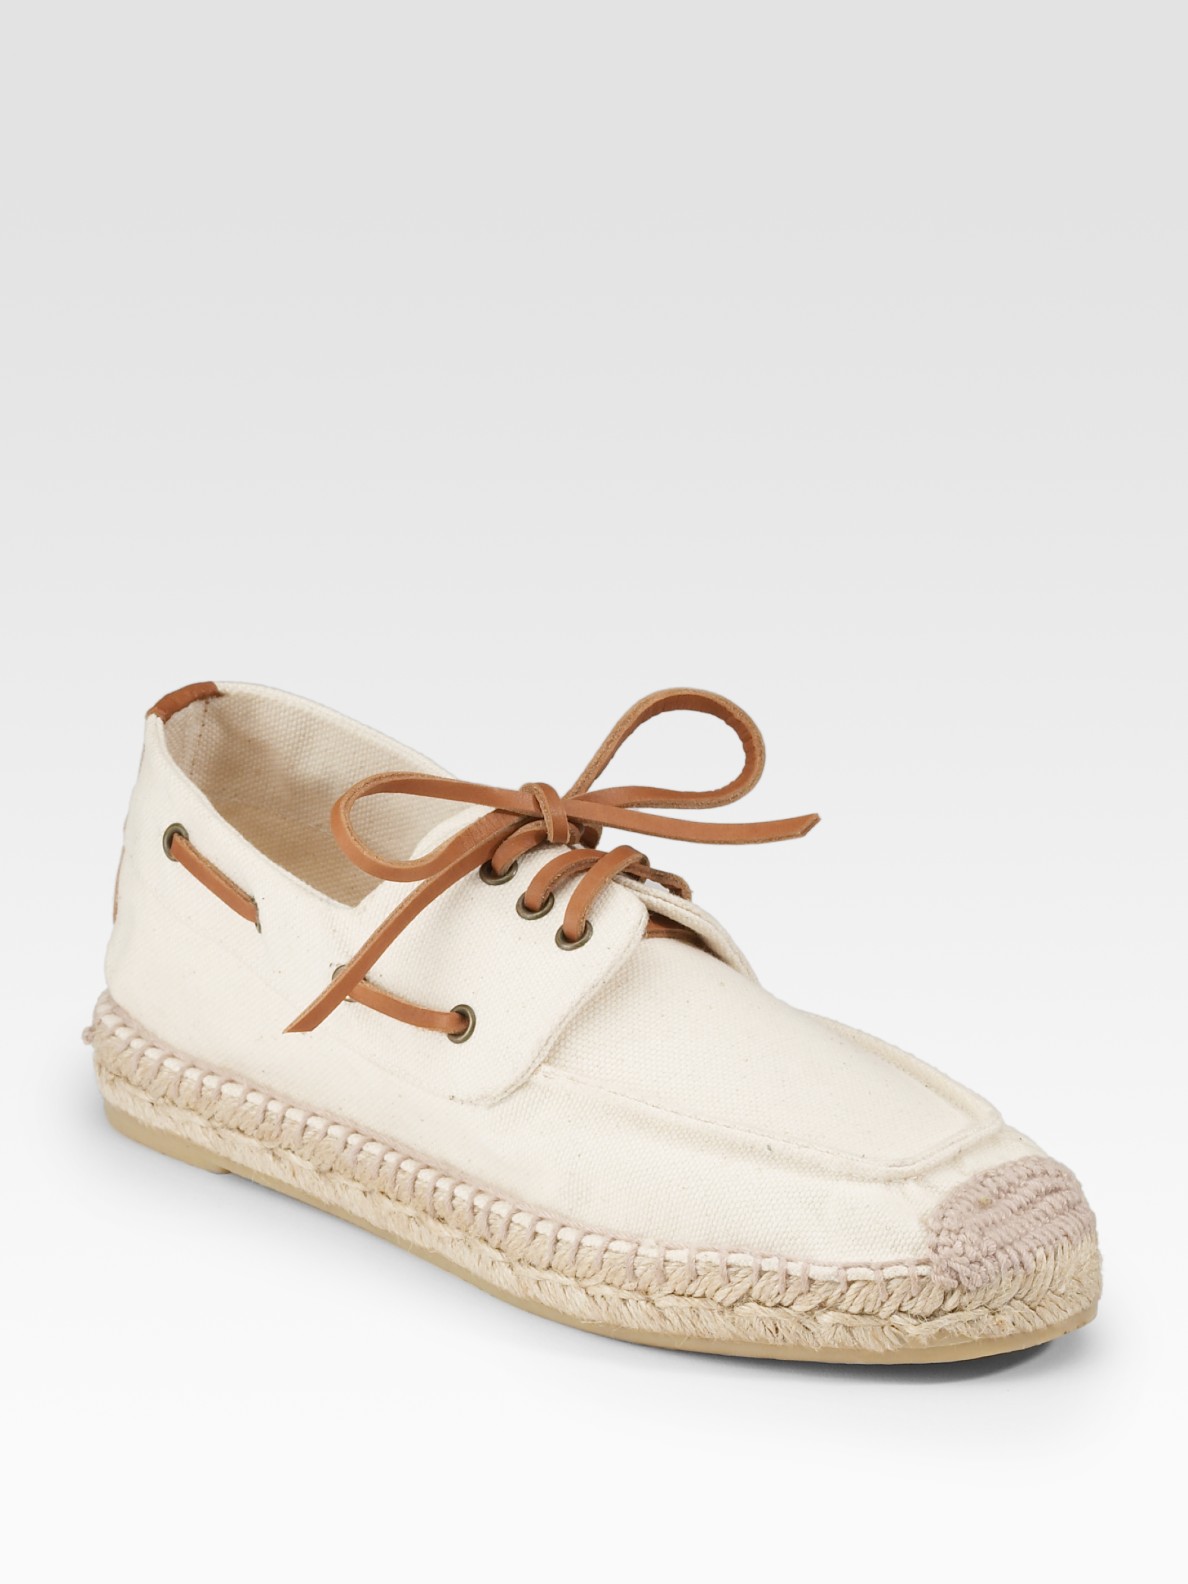 Lyst - Tory burch Top Sider Canvas Espadrilles in White1188 x 1584